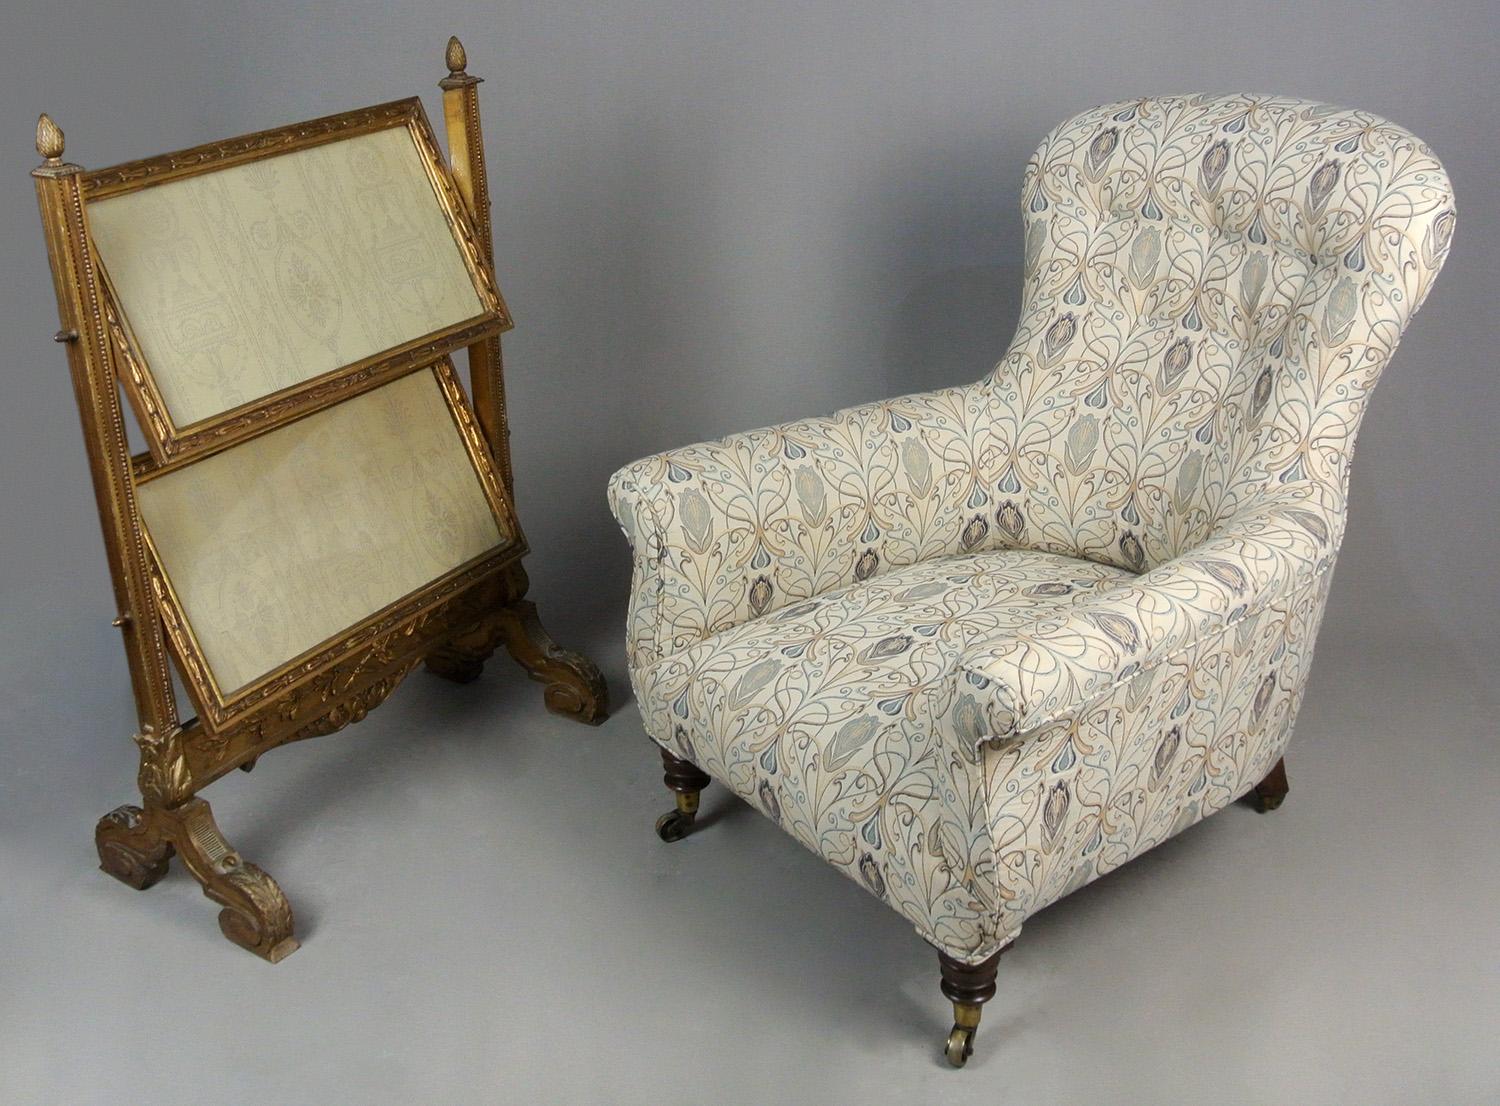 Mahogany Victorian Button Back Arm Chair in the Manner of Howard and Sons c. 1870